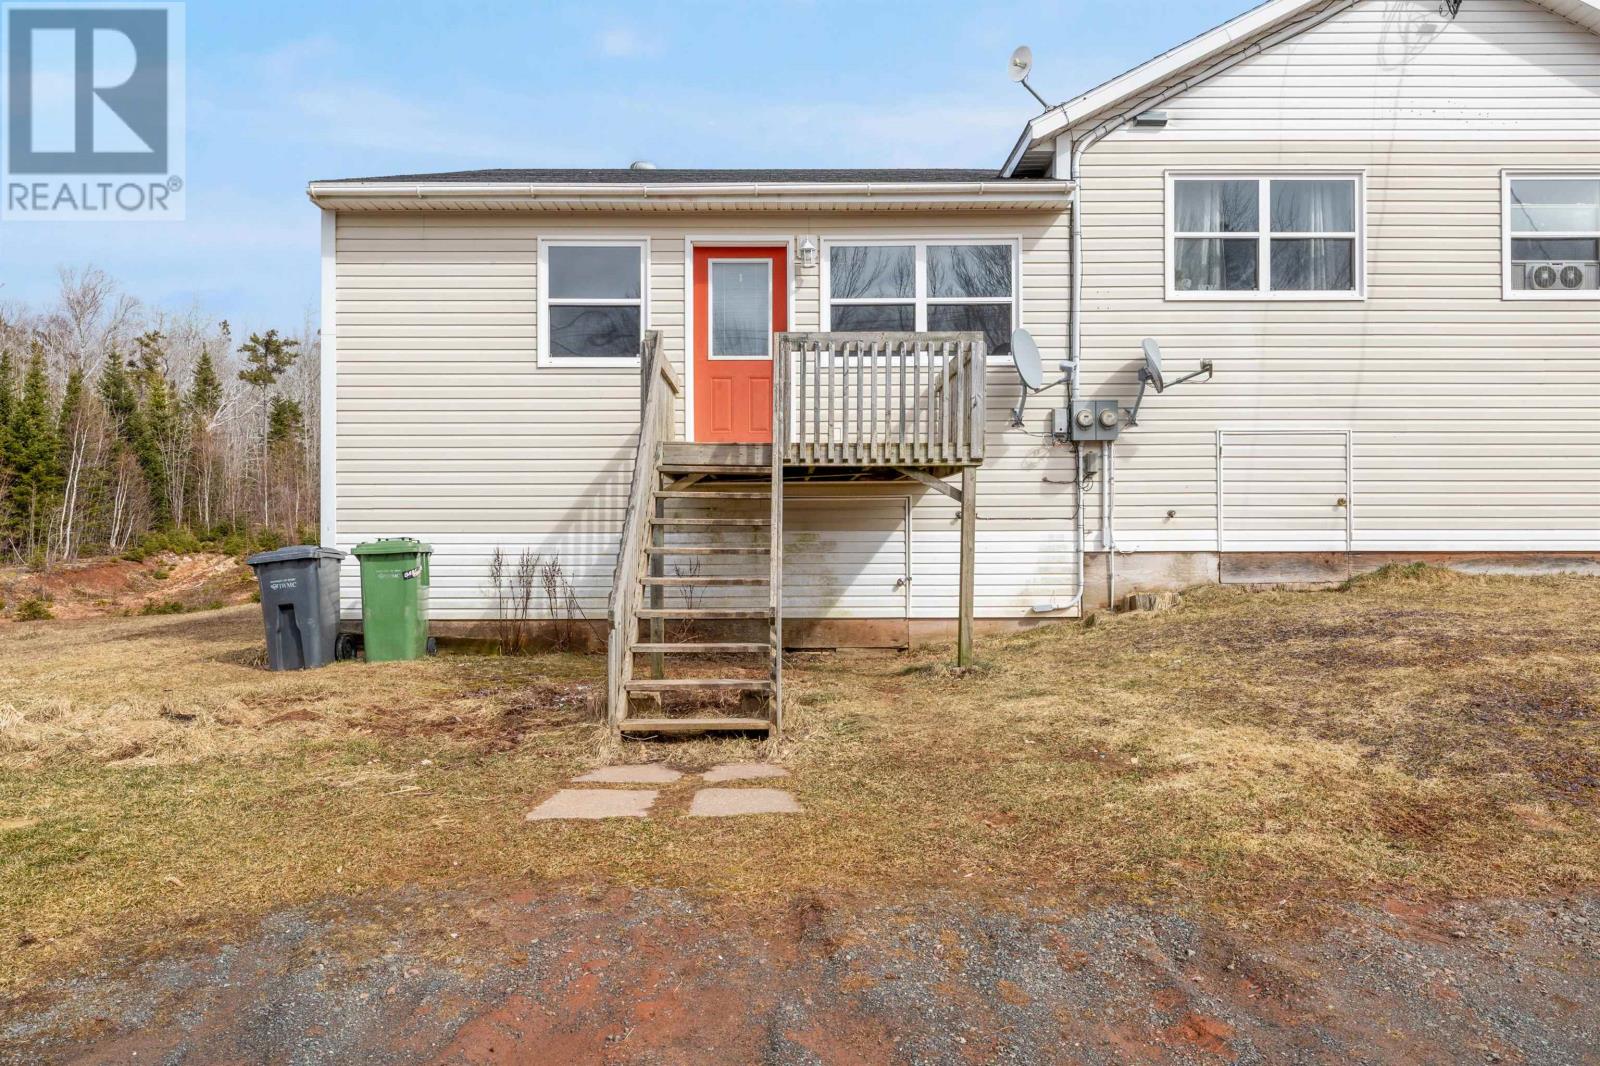 5825/5827 Campbell Road, Victoria Cross, Montague, Prince Edward Island  C0A 1R0 - Photo 2 - 202405681